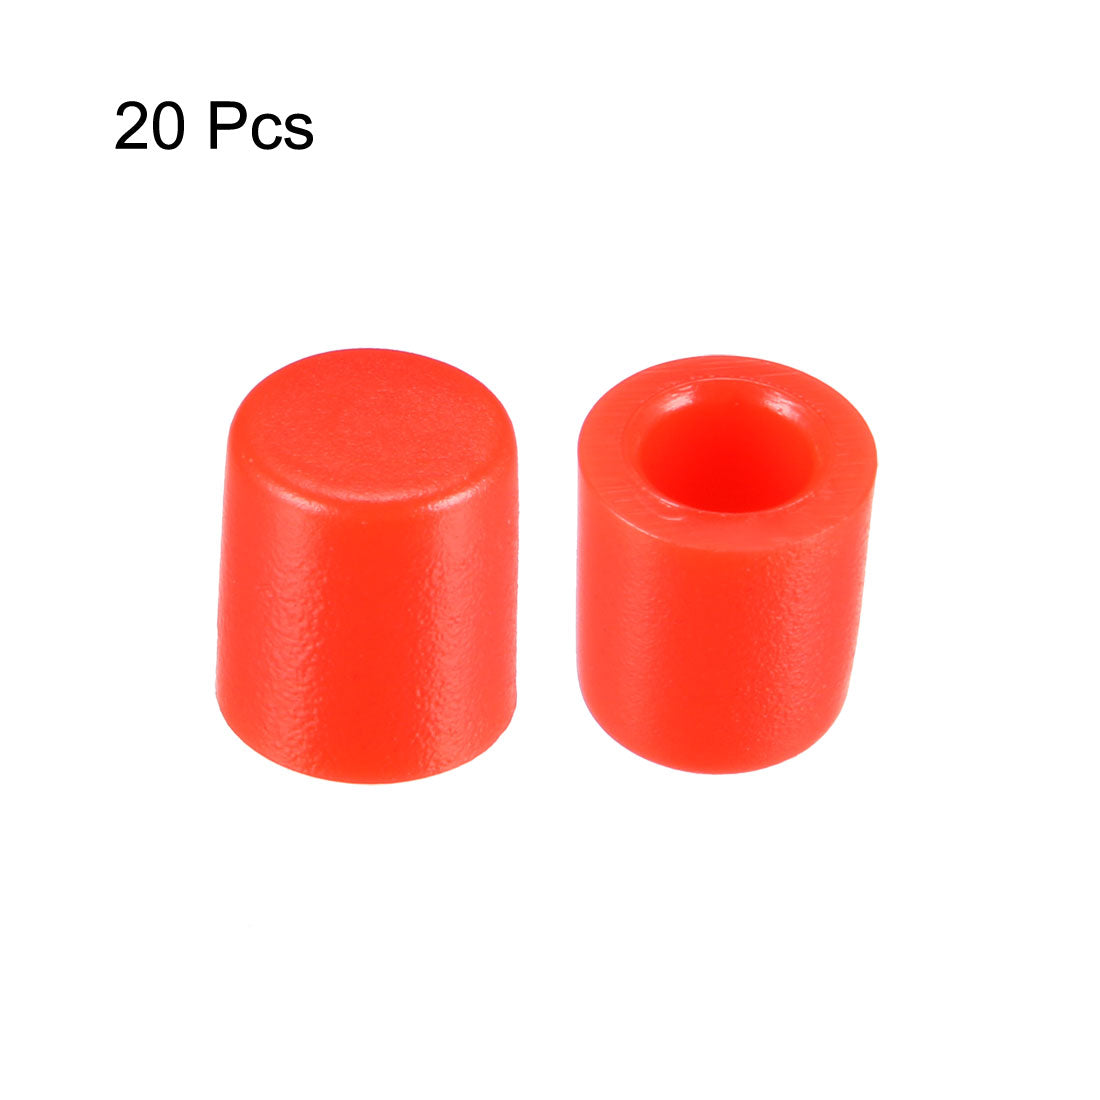 uxcell Uxcell 20Pcs 3.3mm Hole Dia Plastic Push Button Tactile Switch Caps Cover Keycaps Protector Red for 6x6 Micro Switch